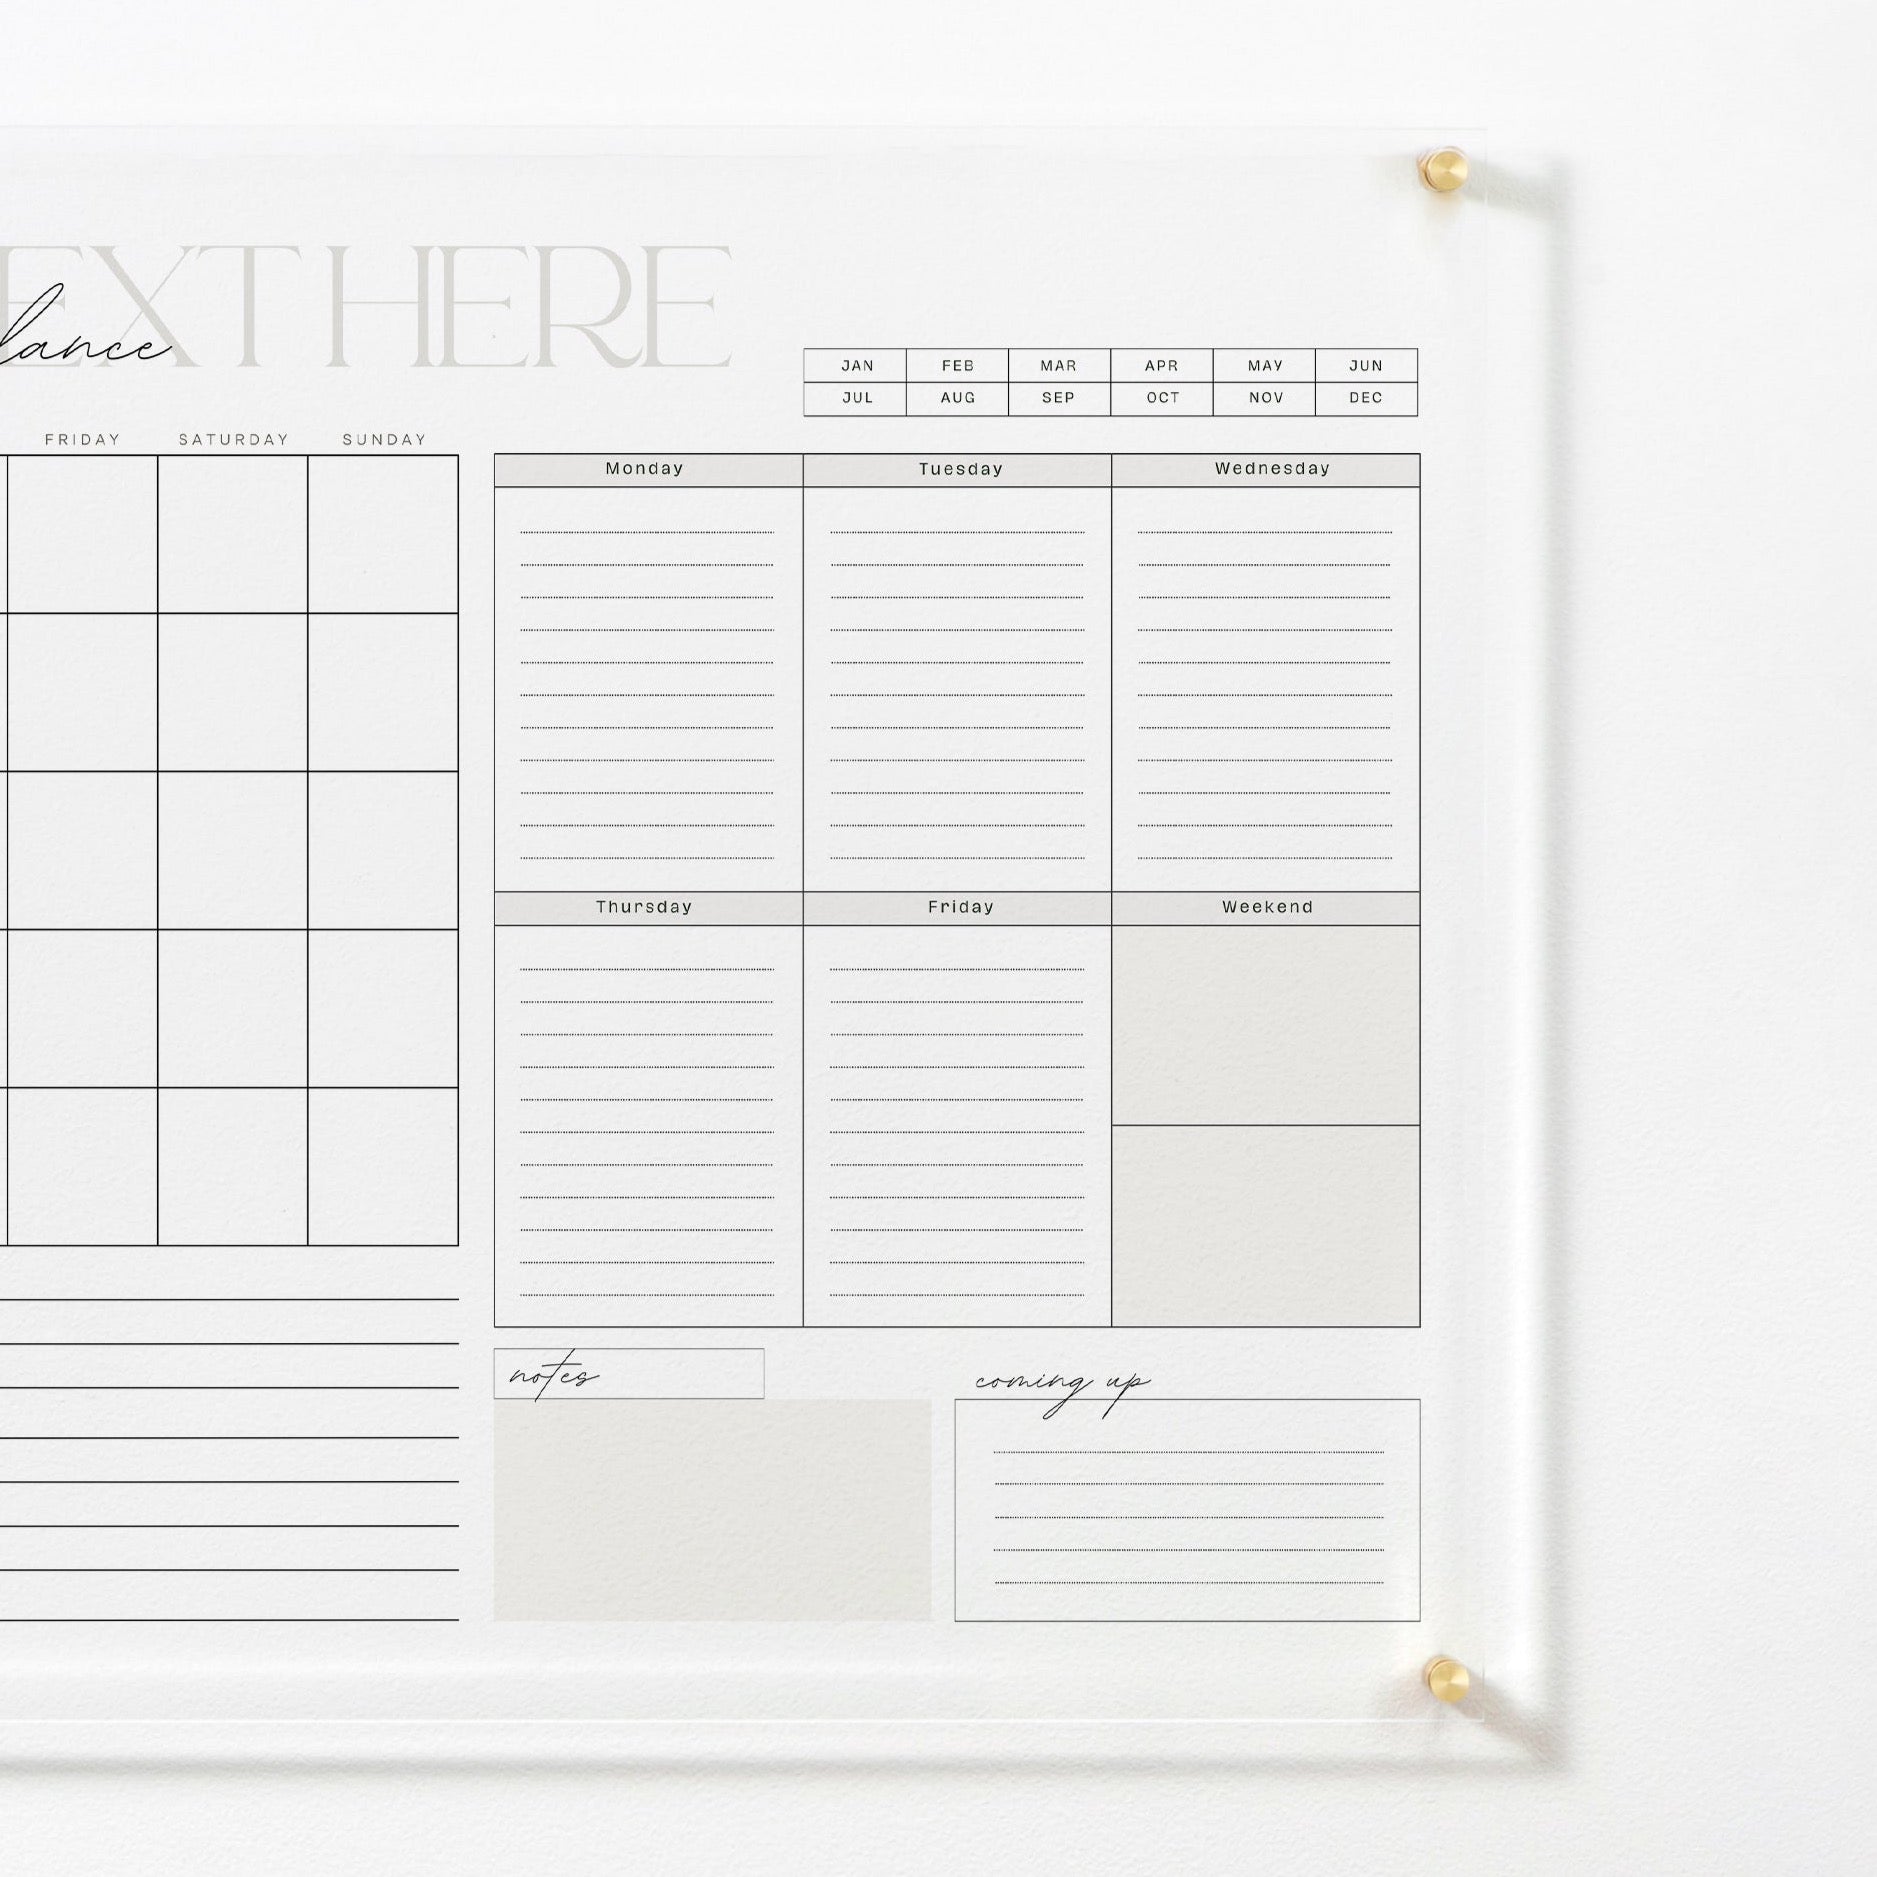 A close-up view of the "Custom Weekly Monthly Calendar - Neutral Chic" dry erase acrylic board showing sections for each day of the week, notes, and upcoming events. The board is mounted on a wall with gold pins, highlighting the elegant and minimalist design.